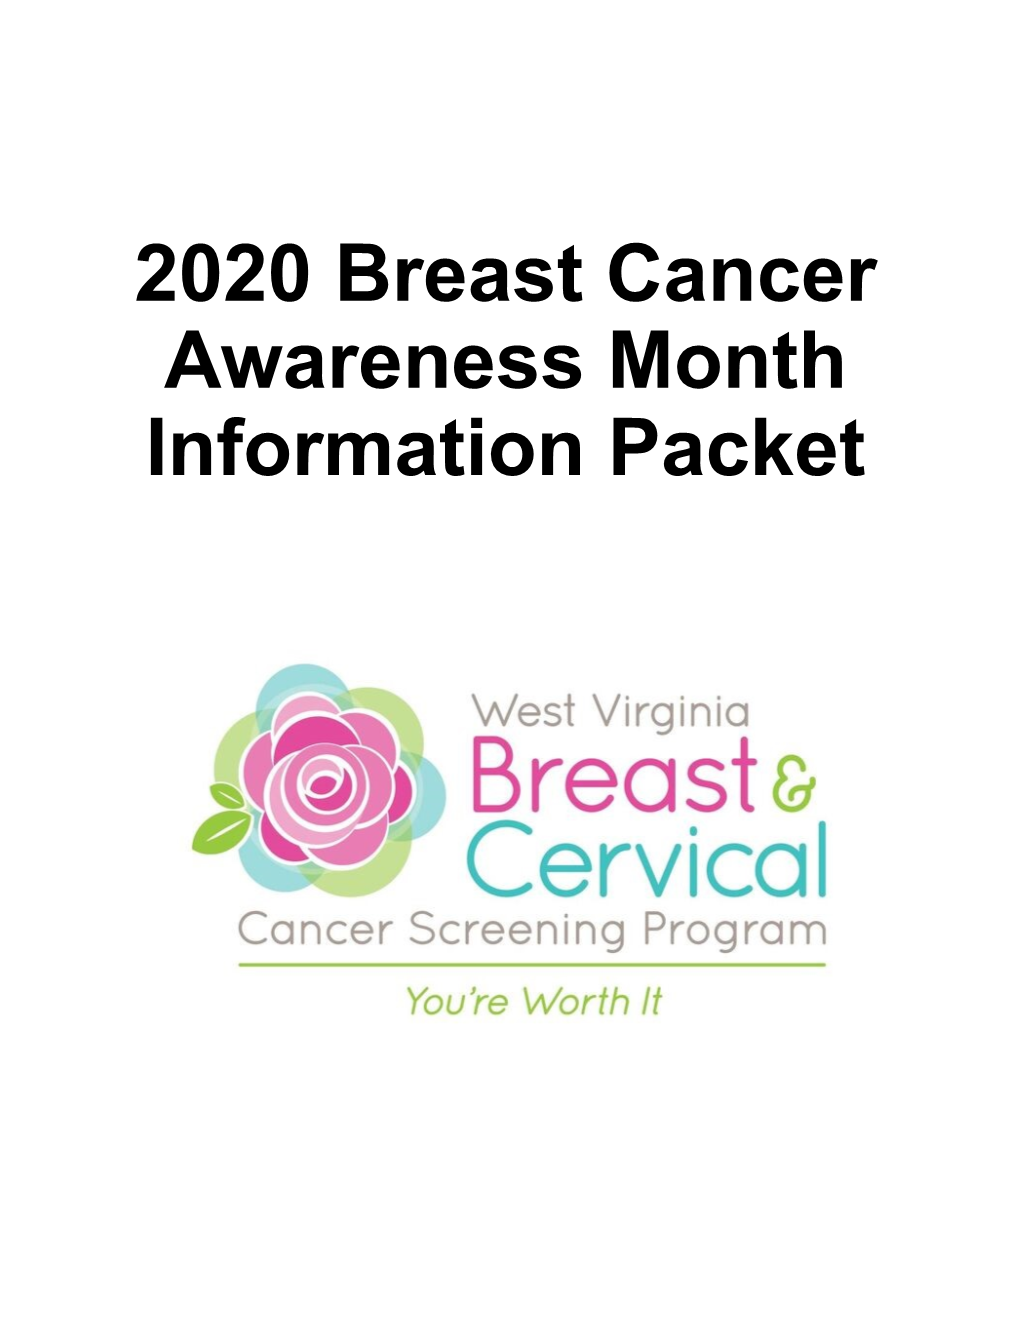 2020 Breast Cancer Awareness Month Information Packet